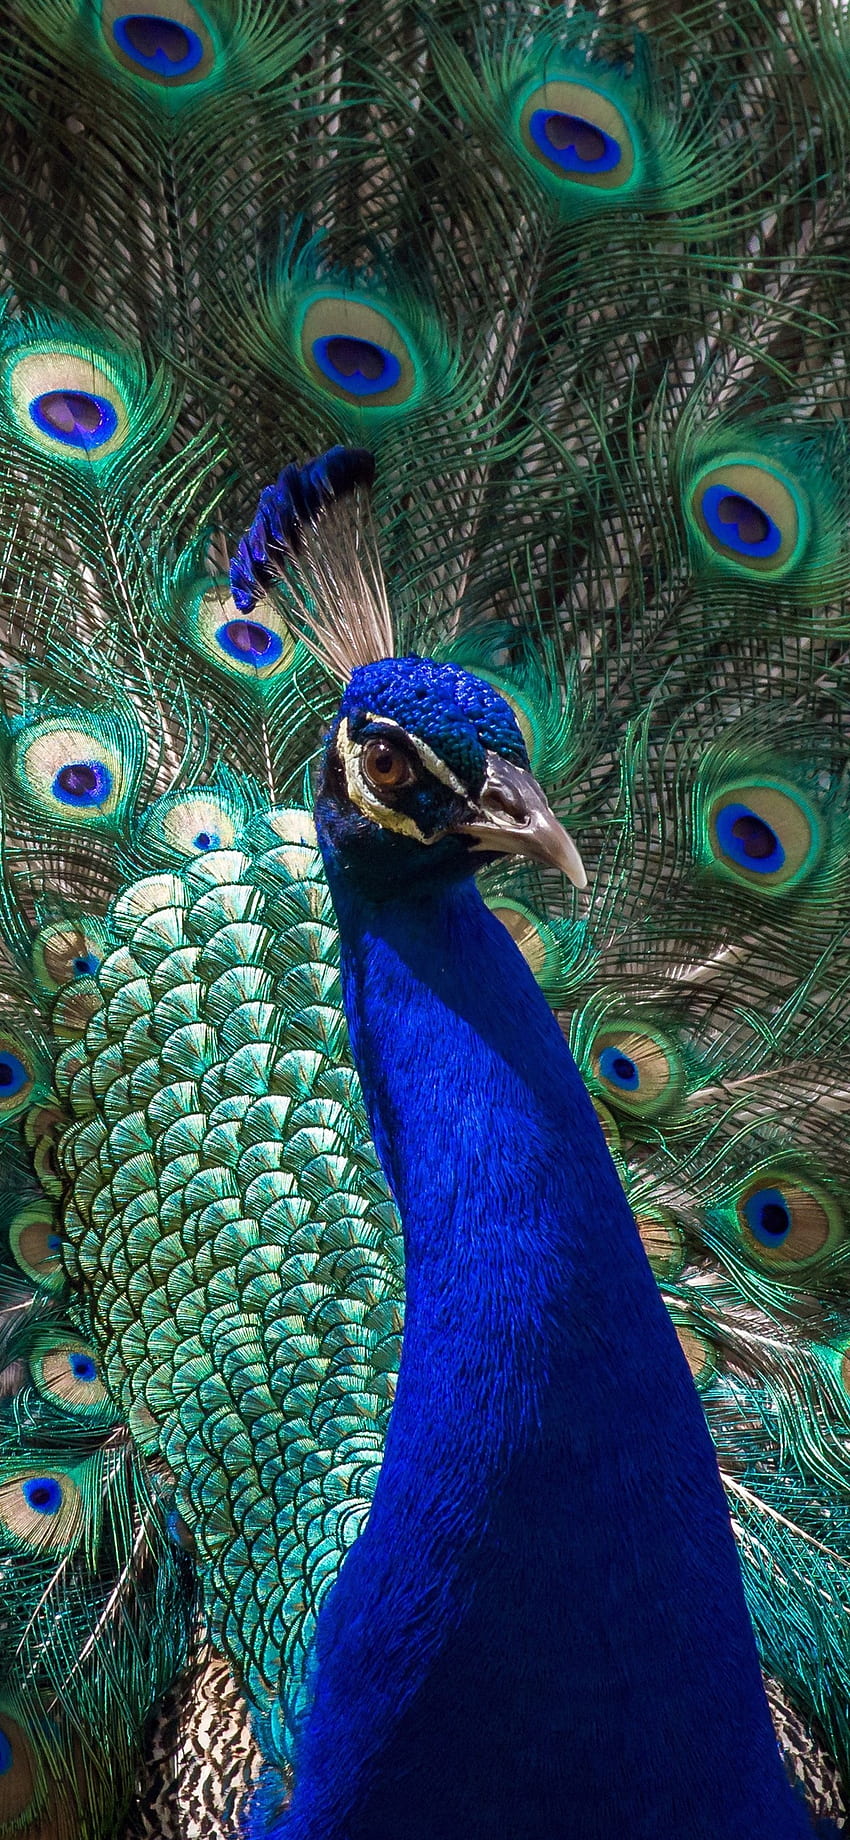 Peacock Open Tail, Beautiful Feathers, Bird IPhone 11 Pro XS Max ...